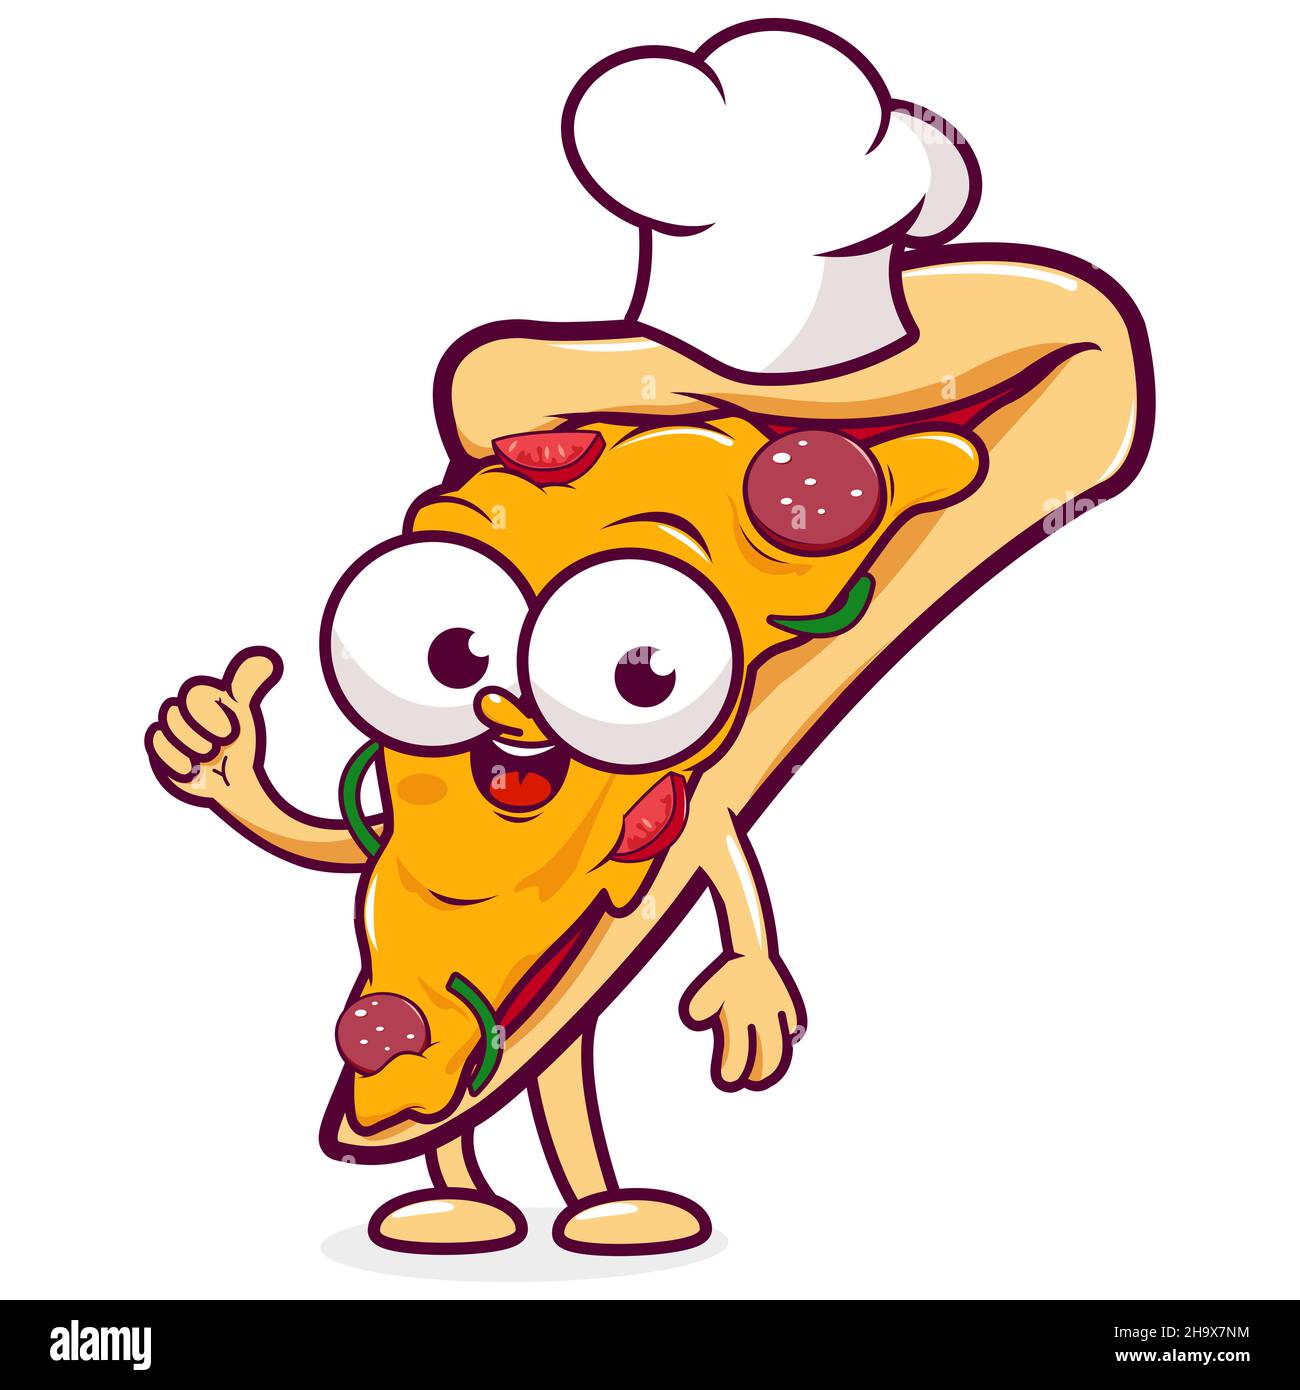 Cartoon pizza slice character with a chef hat. Stock Photo